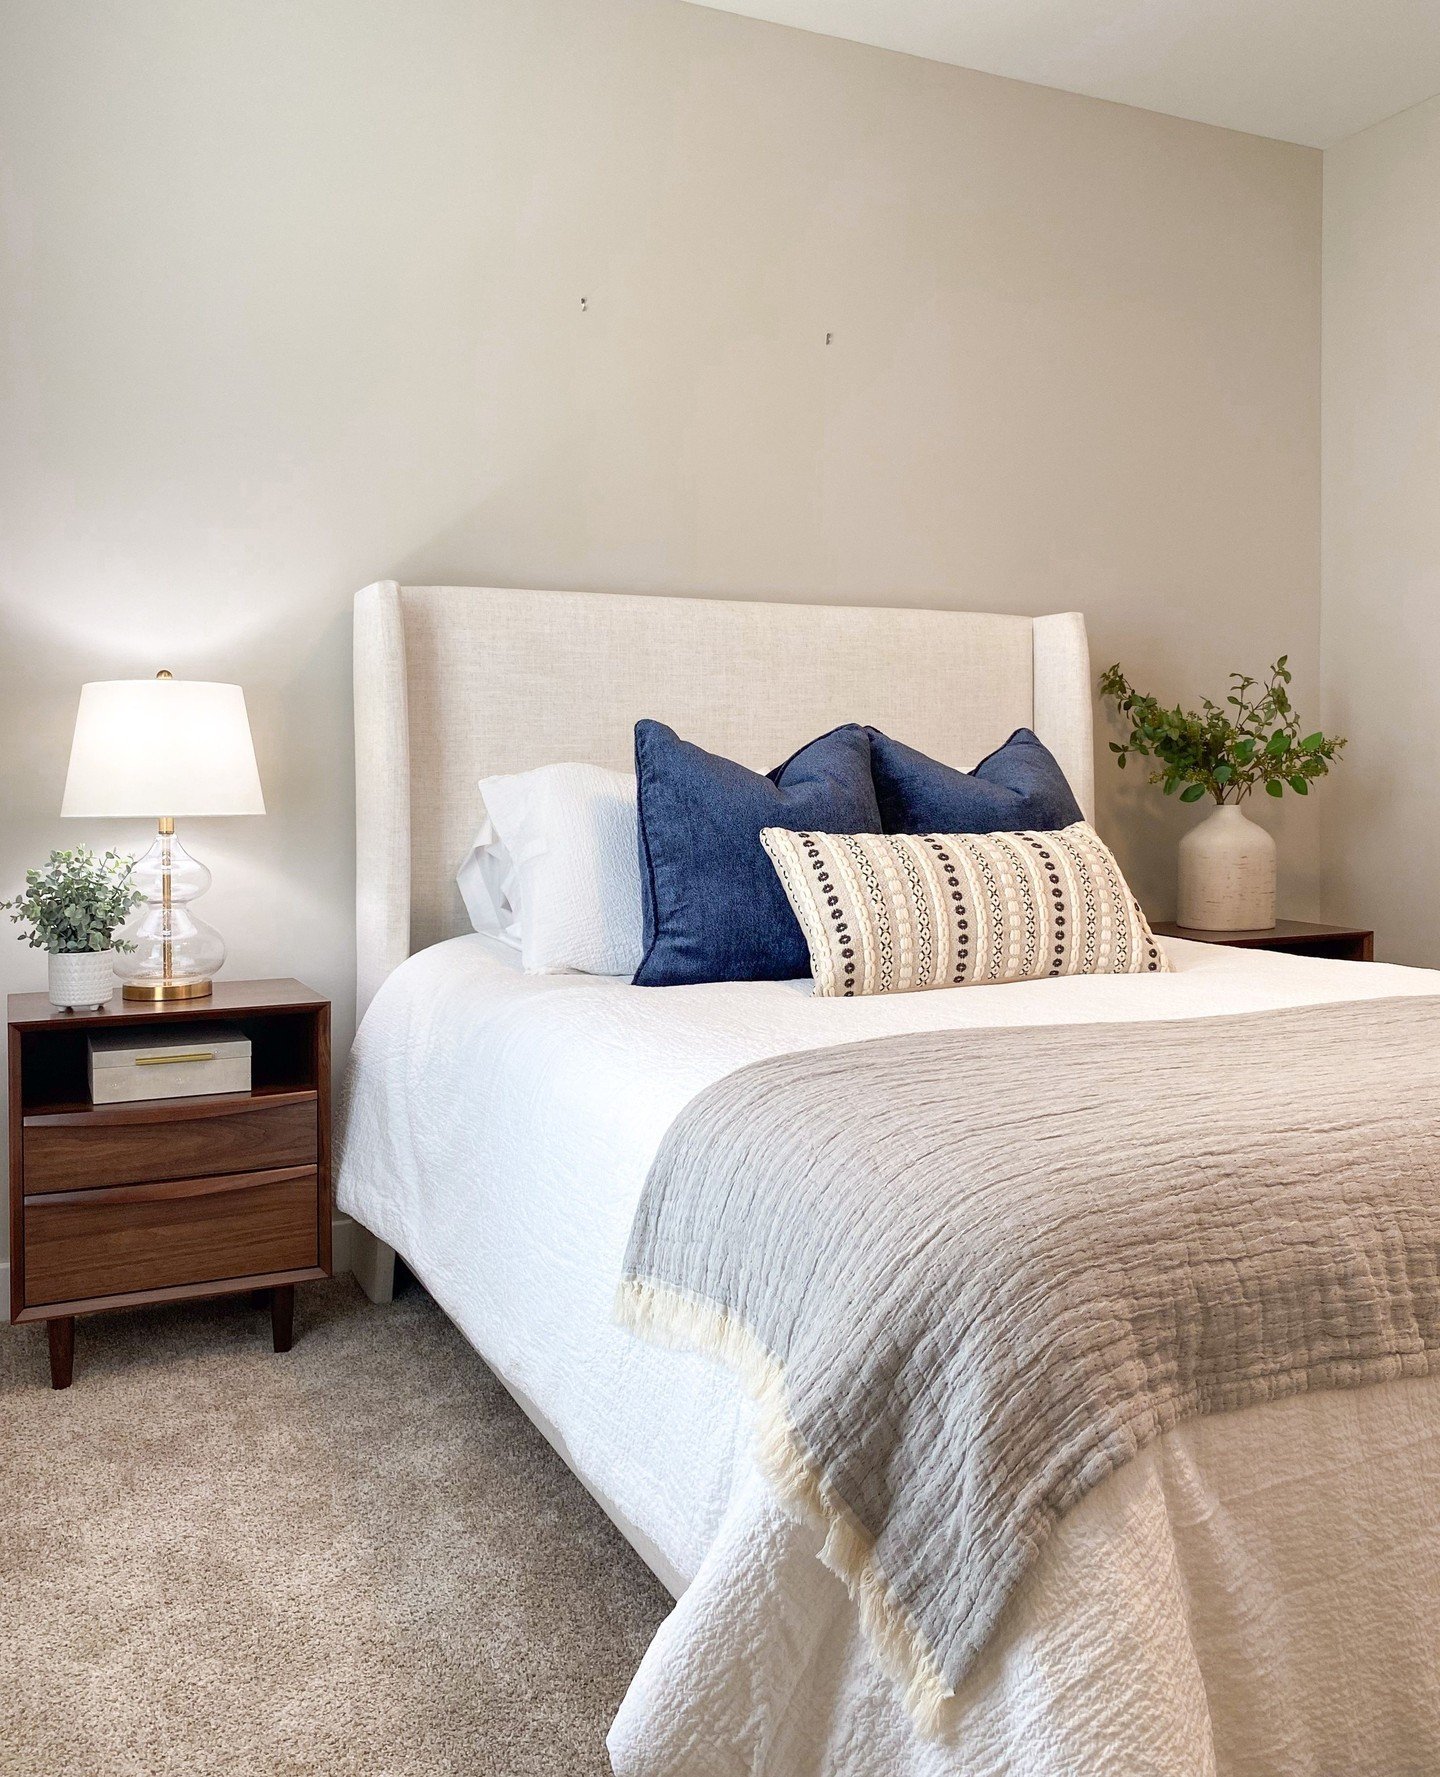 We offer both 1 &amp; 2-bedroom apartments right here in Fort Wayne, IN. Check out our different floor plans online on our website or schedule a tour to come in and see for yourself! ⁠